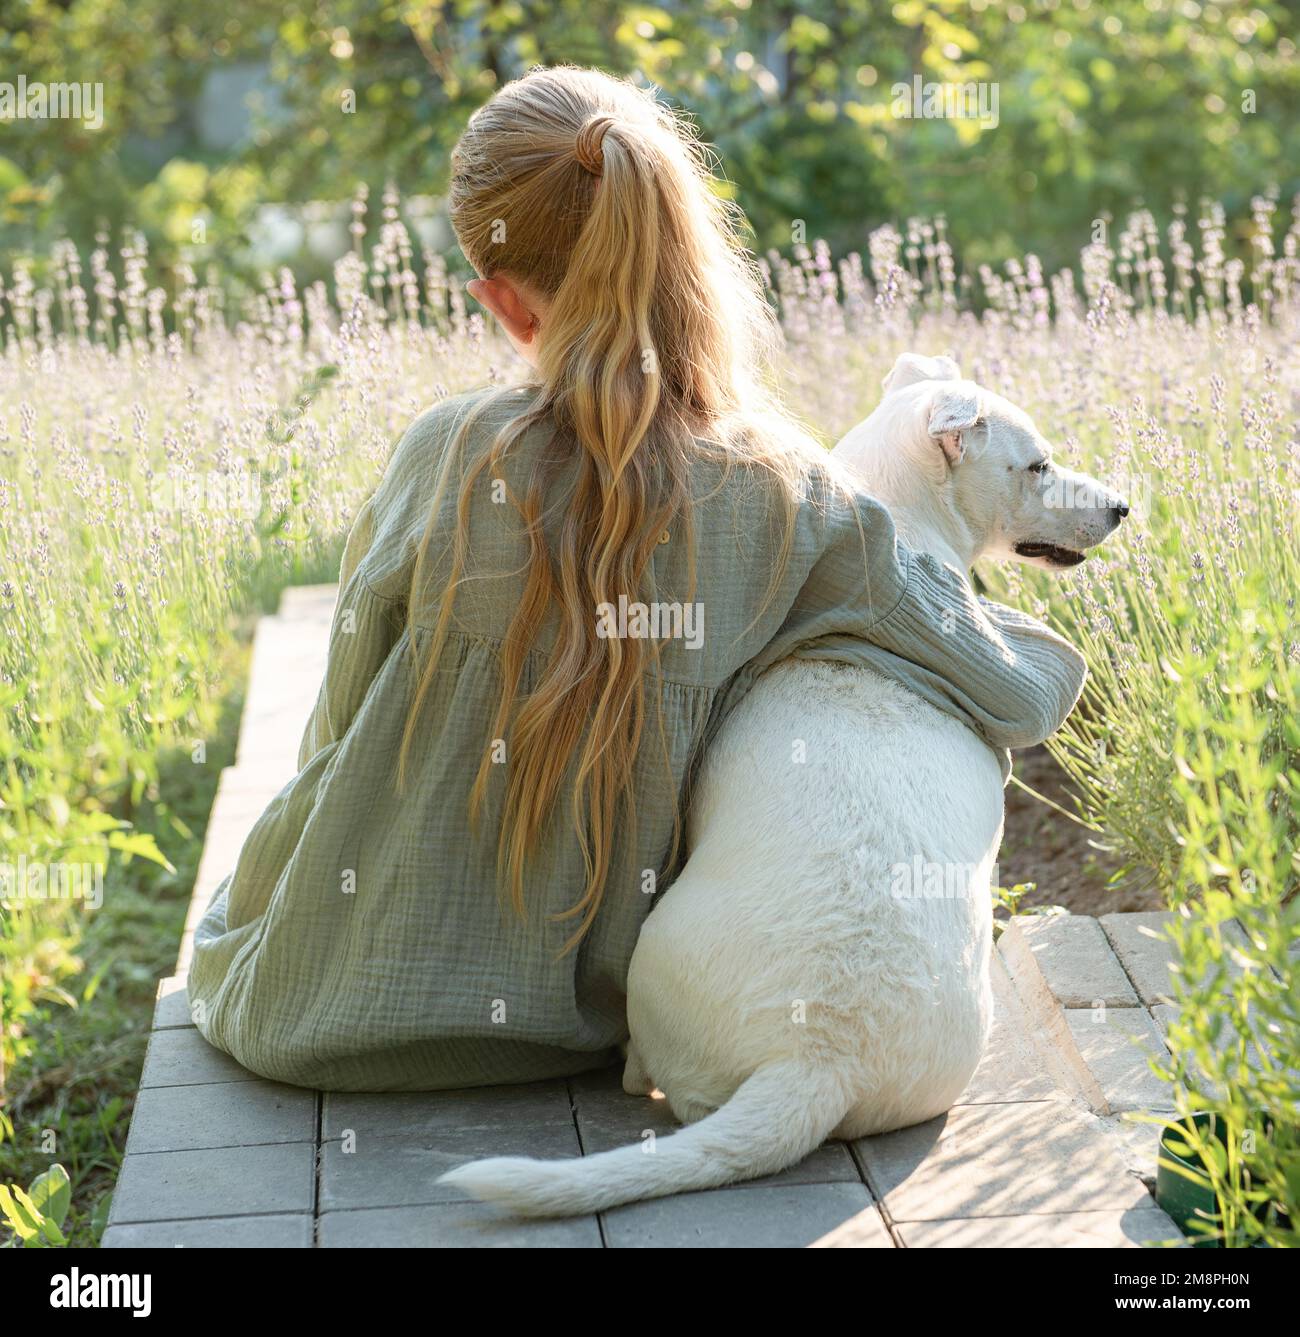 A little girl with a white dog sits and admires the lavender field. View from the back Stock Photo